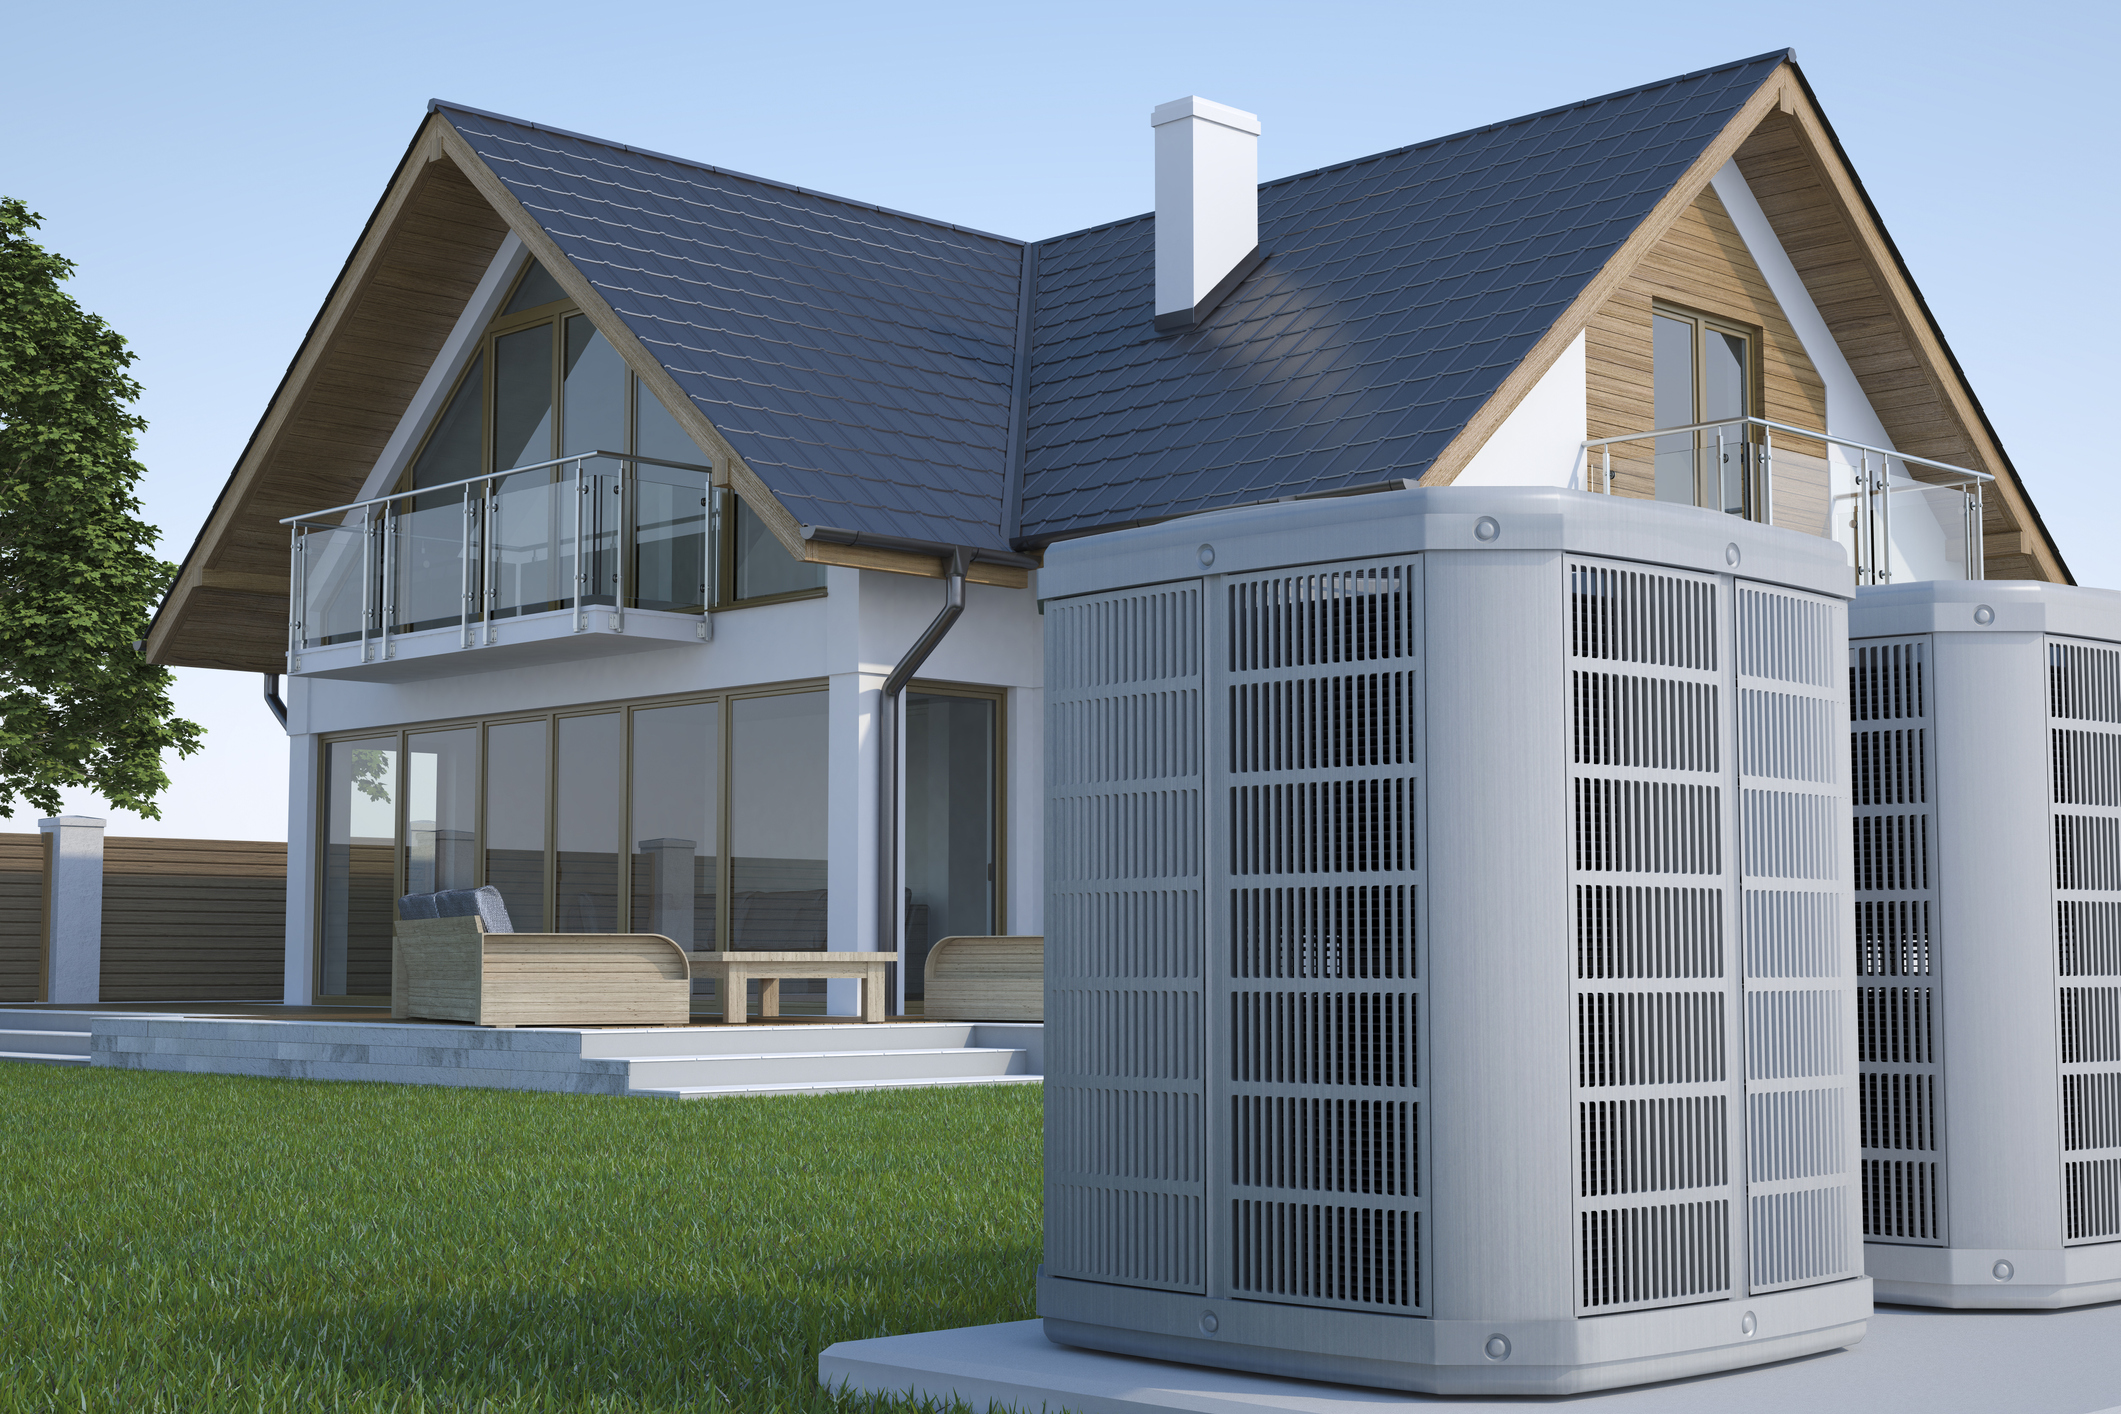 HVAC & Heat Pump Savings With the Inflation Reduction Act